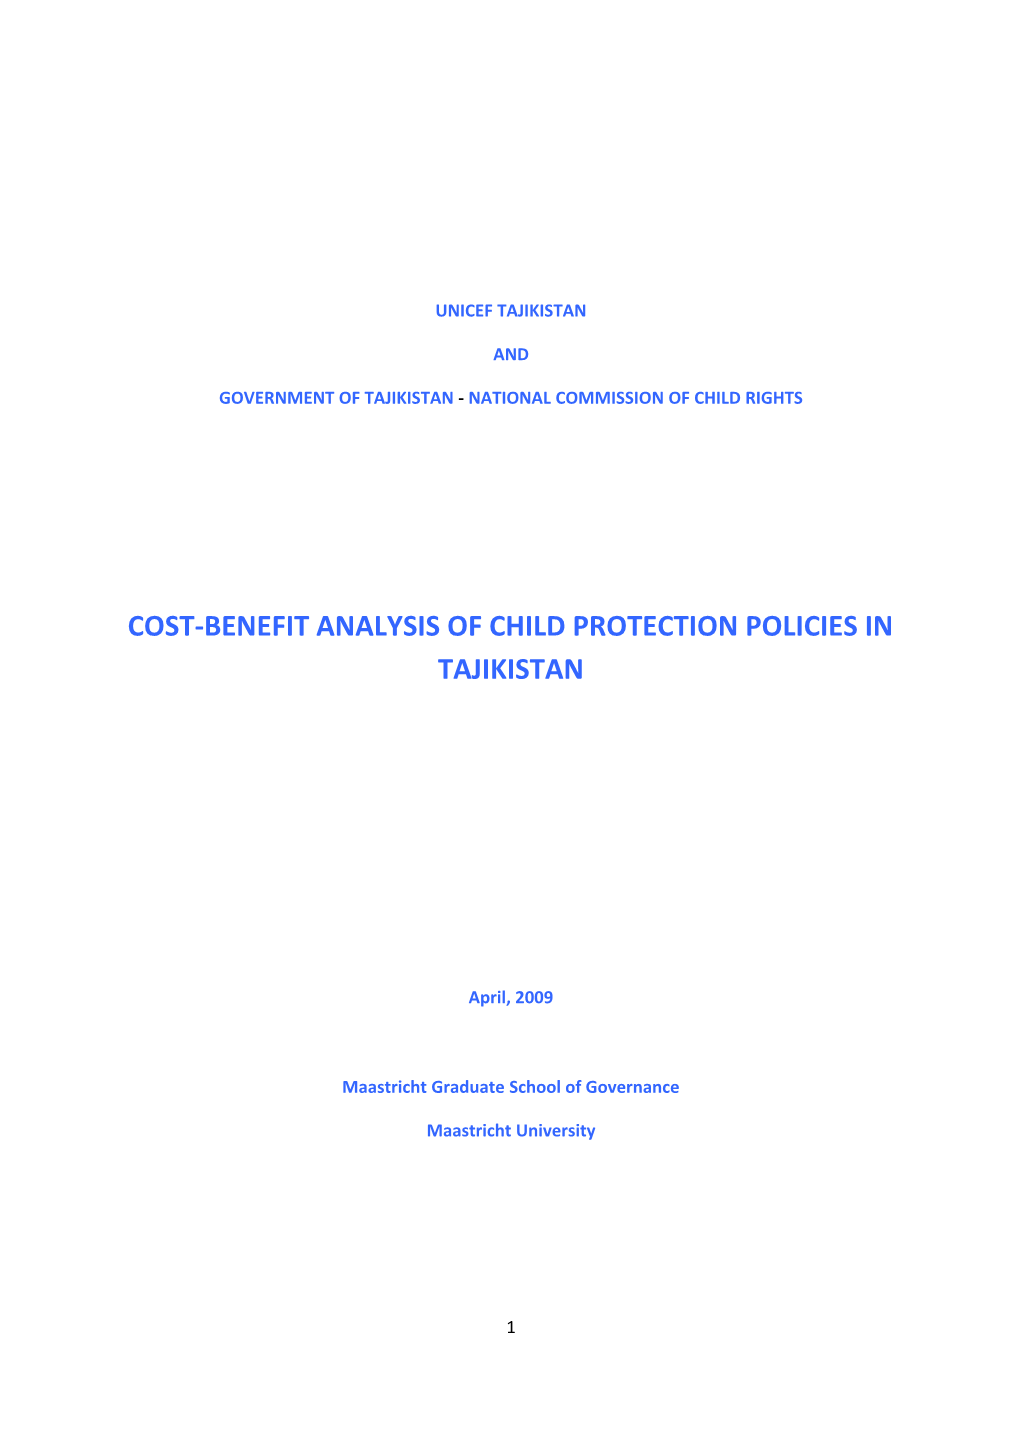 Cost-Benefit Analysis of Child Protection Policies in Tajikistan